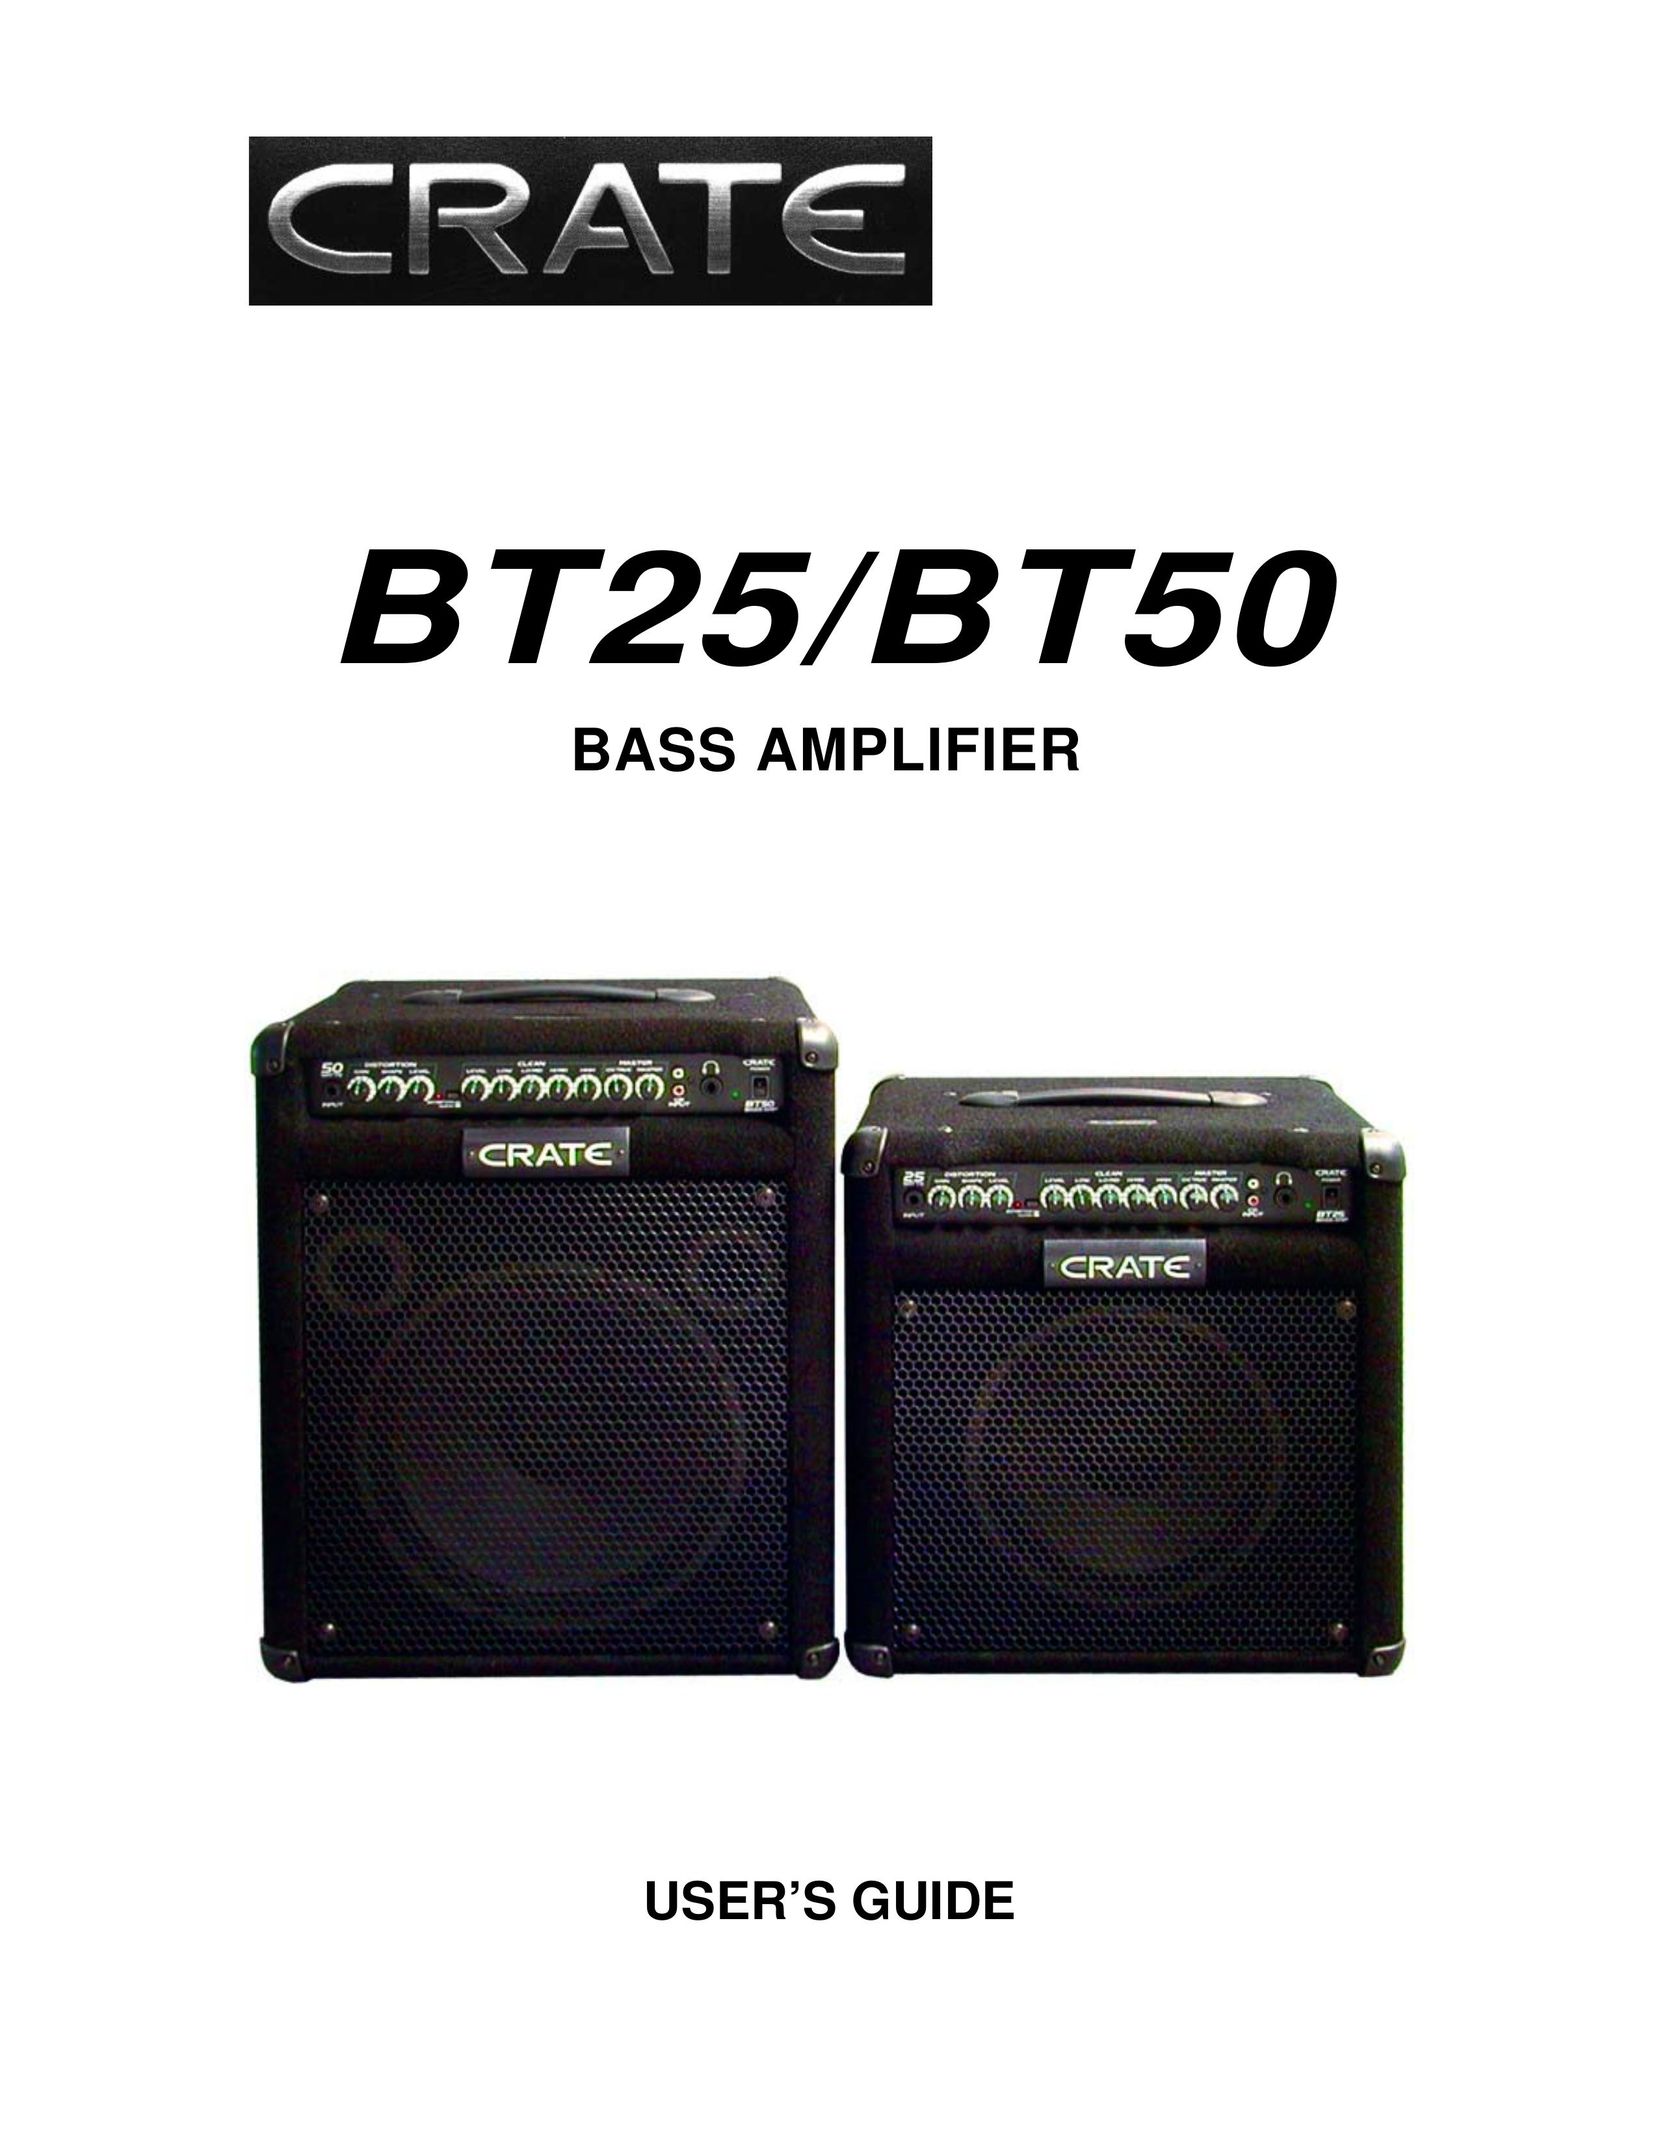 Crate Amplifiers crate bass amplifier Speaker System User Manual